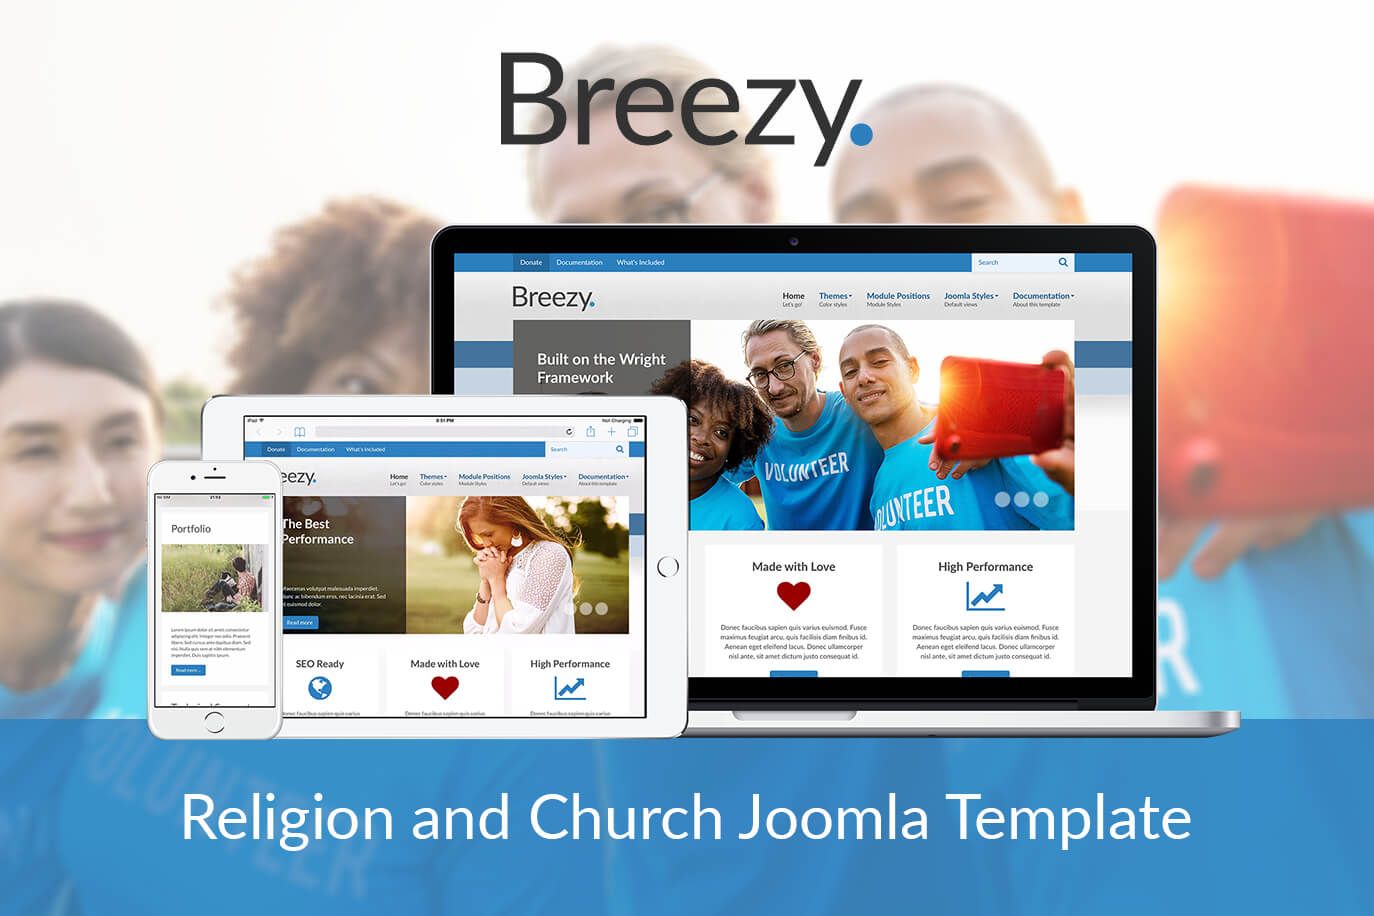 A light and airy Joomla template - Breezy